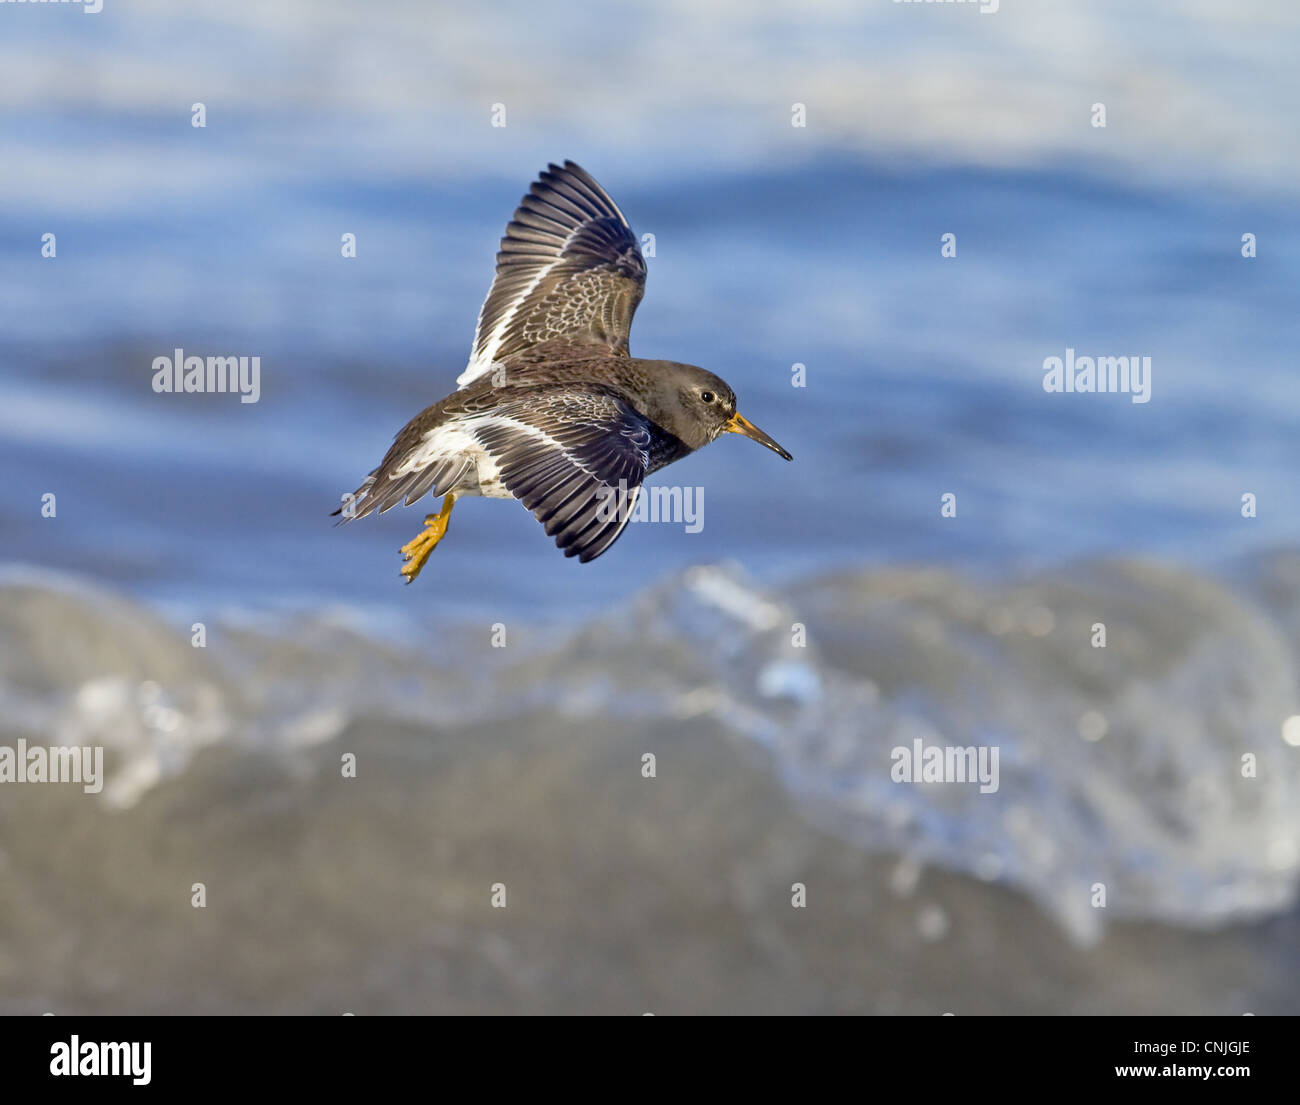 Purple Sandpiper (Calidris maritima) adult, winter plumage, in flight over sea with breaking wave, Northern Norway, march Stock Photo